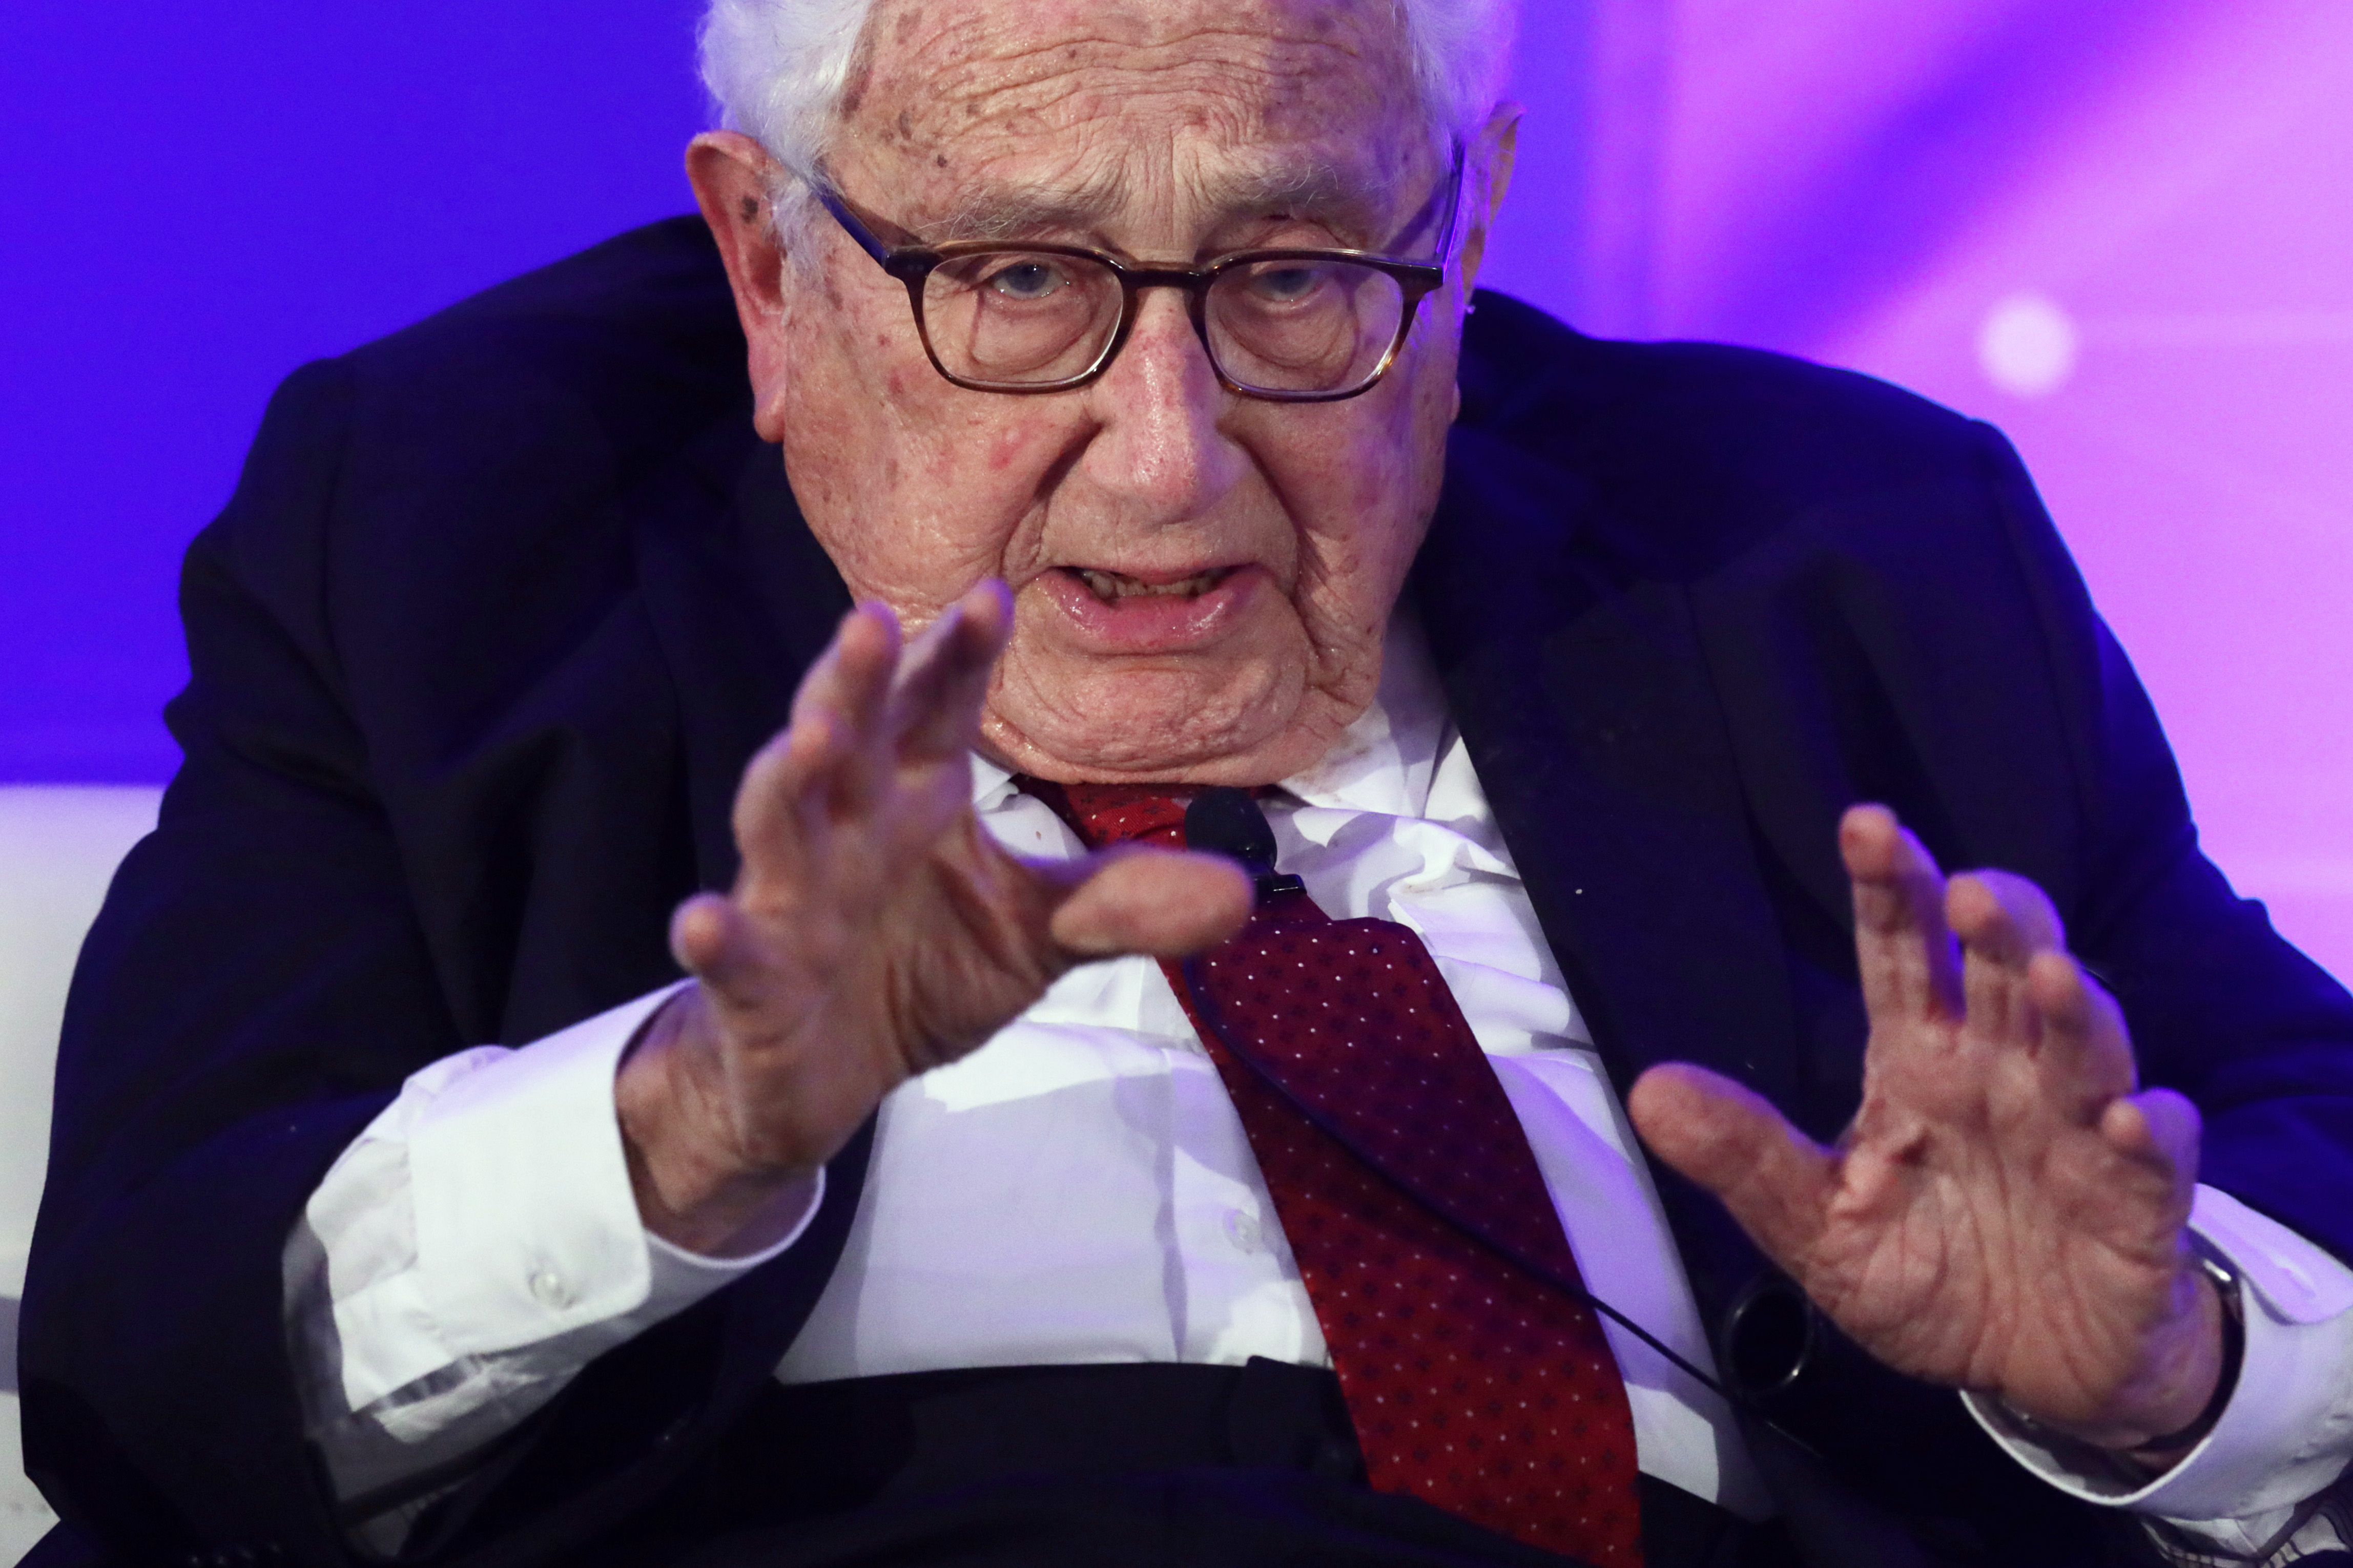 WASHINGTON, DC - NOVEMBER 05:  Former U.S. Secretary of State Henry Kissinger speaks during a National Security Commission on Artificial Intelligence (NSCAI) conference November 5, 2019 in Washington, DC. (Alex Wong/Getty Images)